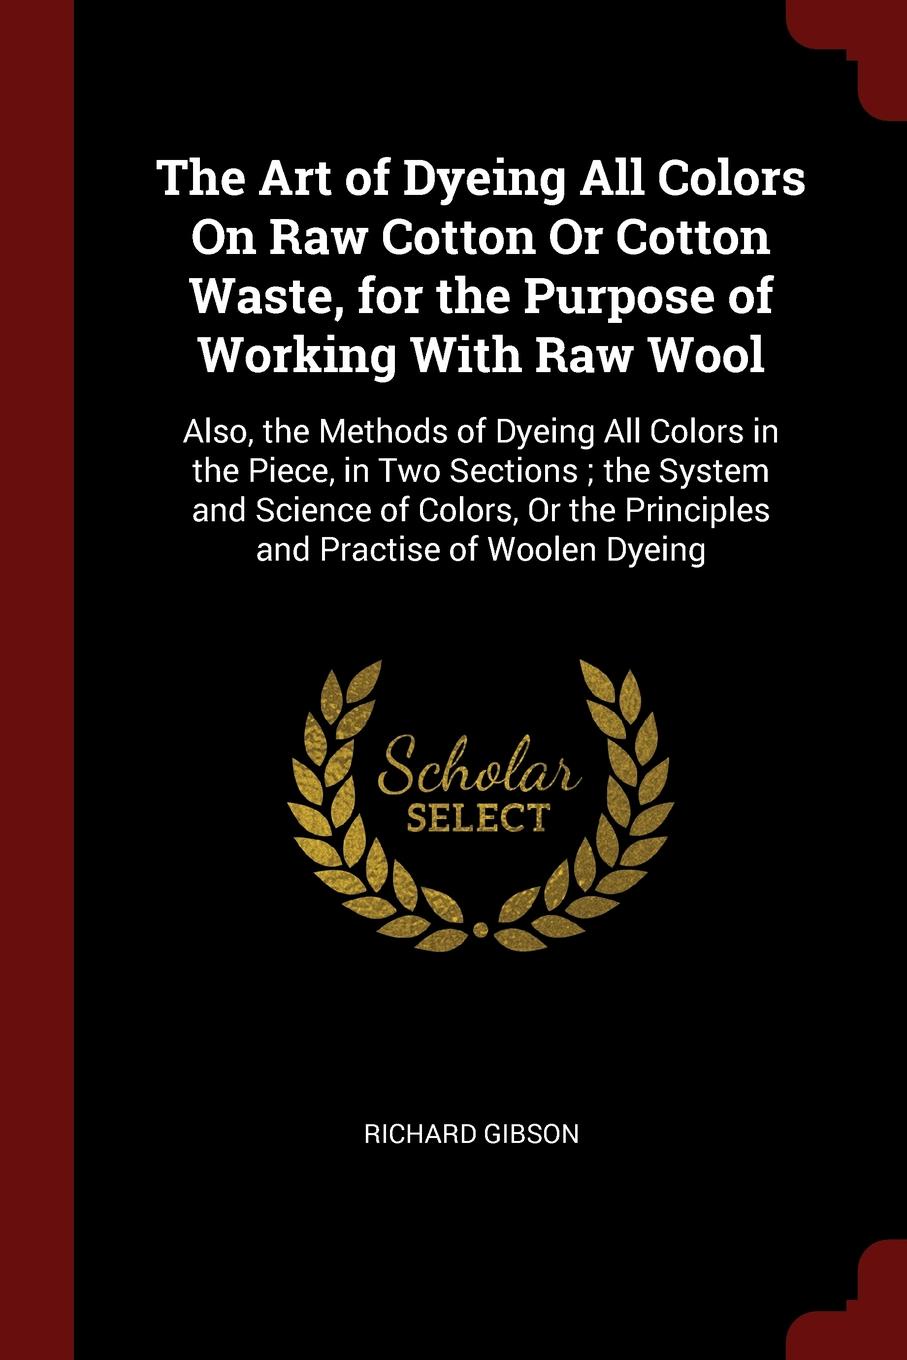 The Art of Dyeing All Colors On Raw Cotton Or Cotton Waste, for the Purpose of Working With Raw Wool. Also, the Methods of Dyeing All Colors in the Piece, in Two Sections ; the System and Science of Colors, Or the Principles and Practise of Woolen...